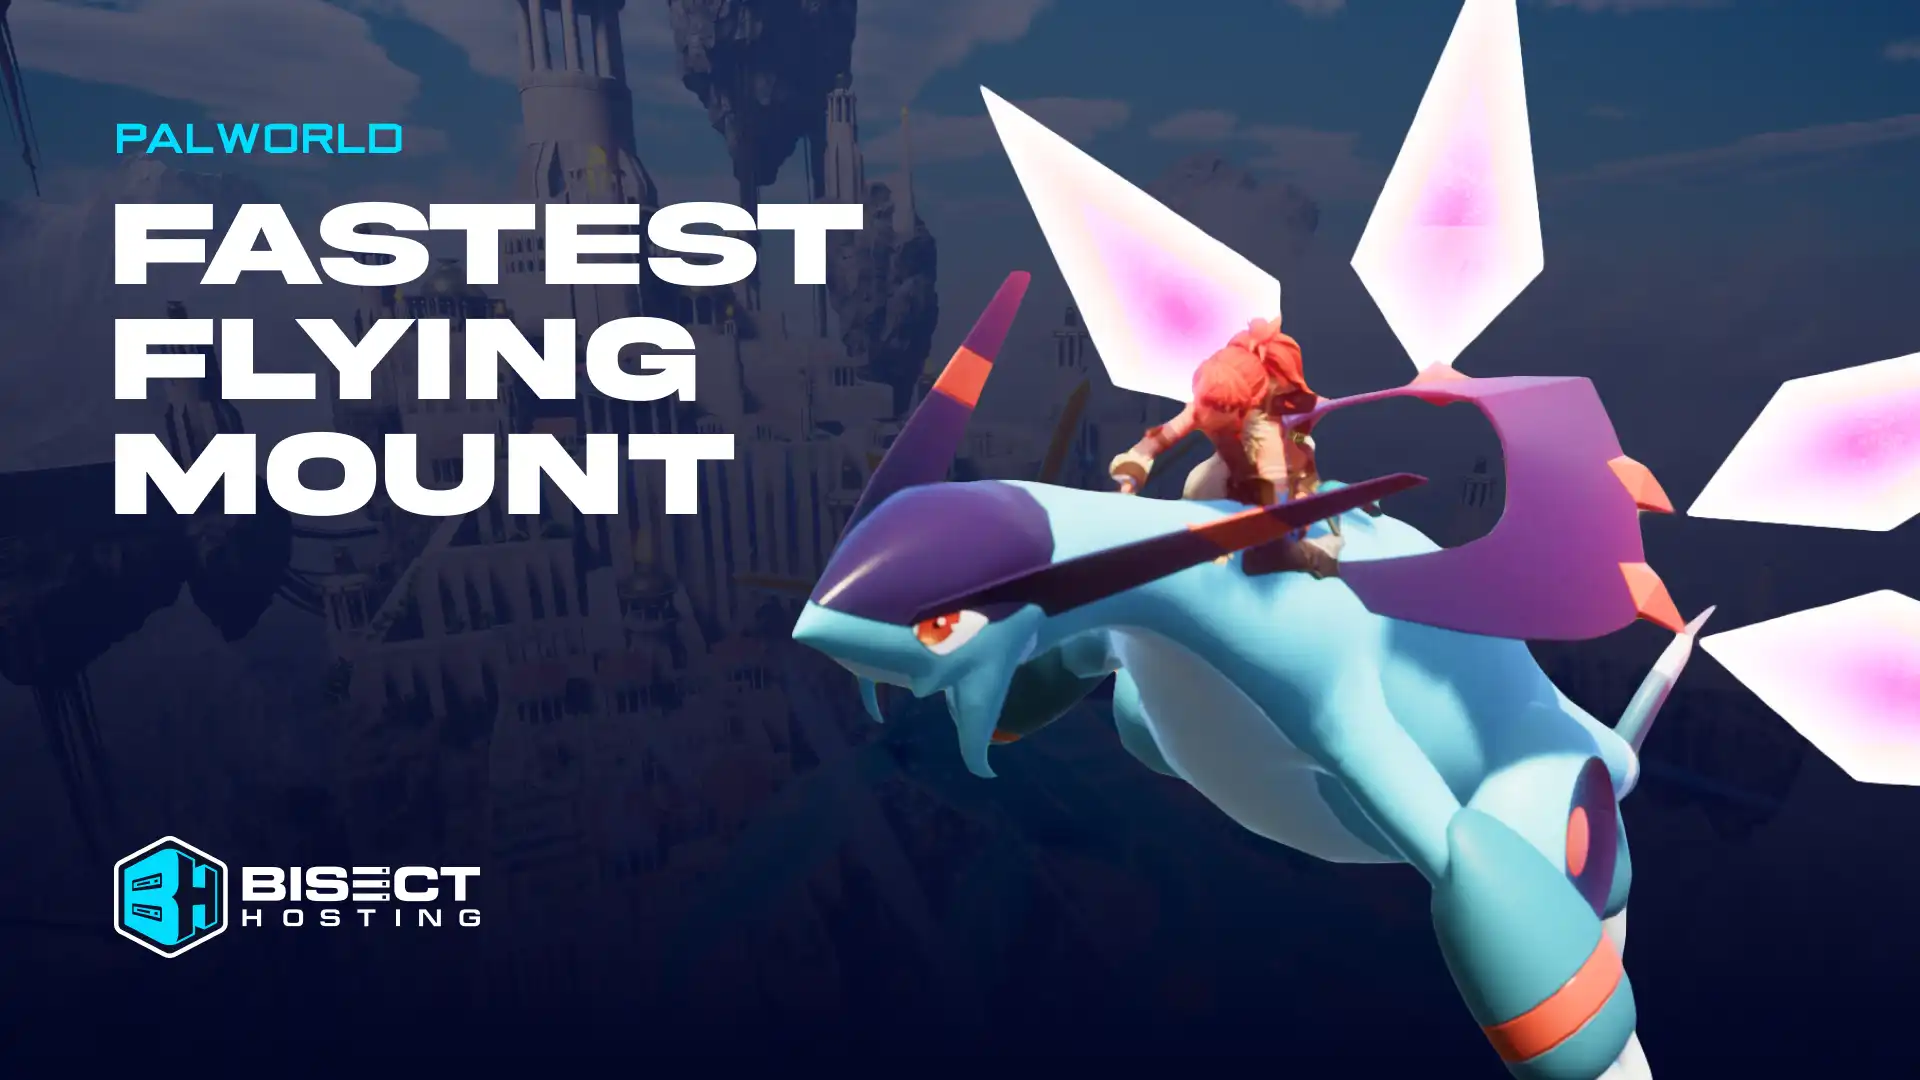 Ranking the Fastest Flying Mounts in Palworld